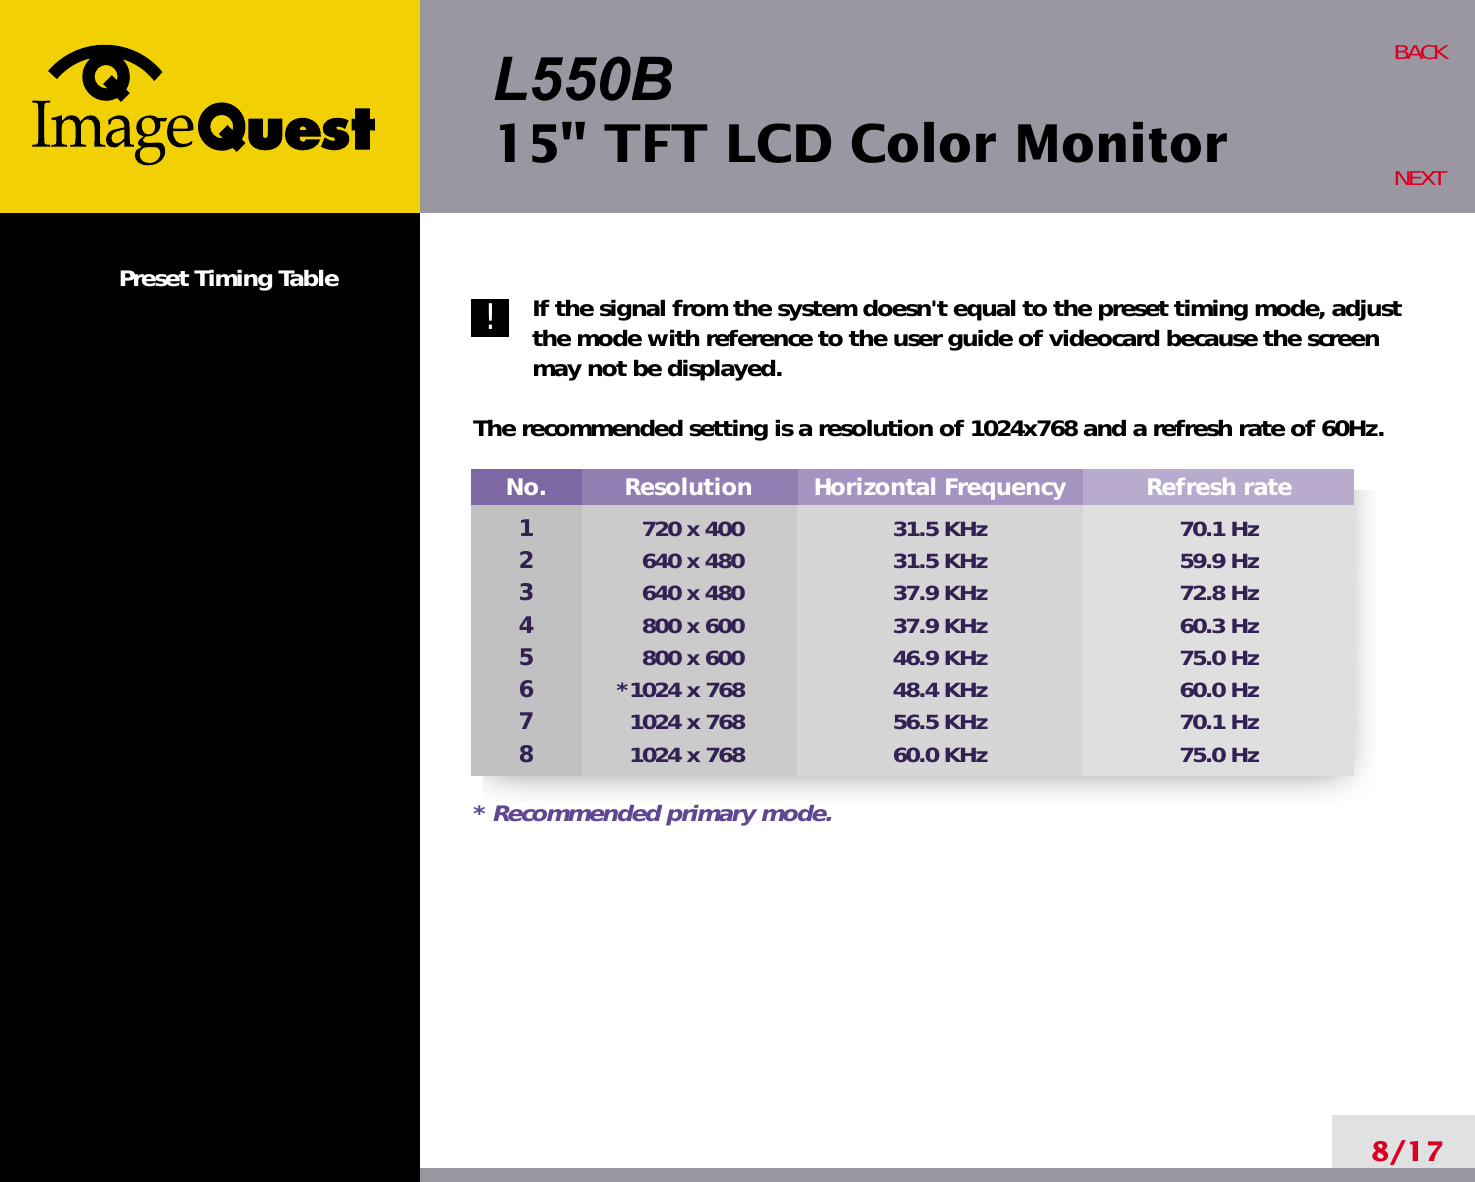 L550B15&quot; TFT LCD Color MonitorPreset Timing Table If the signal from the system doesn&apos;t equal to the preset timing mode, adjustthe mode with reference to the user guide of videocard because the screenmay not be displayed.The recommended setting is a resolution of 1024x768 and a refresh rate of 60Hz.8/17BACKNEXT!No.12345678Resolution720 x 400640 x 480640 x 480800 x 600800 x 600*1024 x 7681024 x 7681024 x 768Horizontal Frequency31.5 KHz31.5 KHz37.9 KHz37.9 KHz46.9 KHz48.4 KHz56.5 KHz60.0 KHzRefresh rate70.1 Hz59.9 Hz72.8 Hz60.3 Hz75.0 Hz60.0 Hz70.1 Hz75.0 Hz* Recommended primary mode.